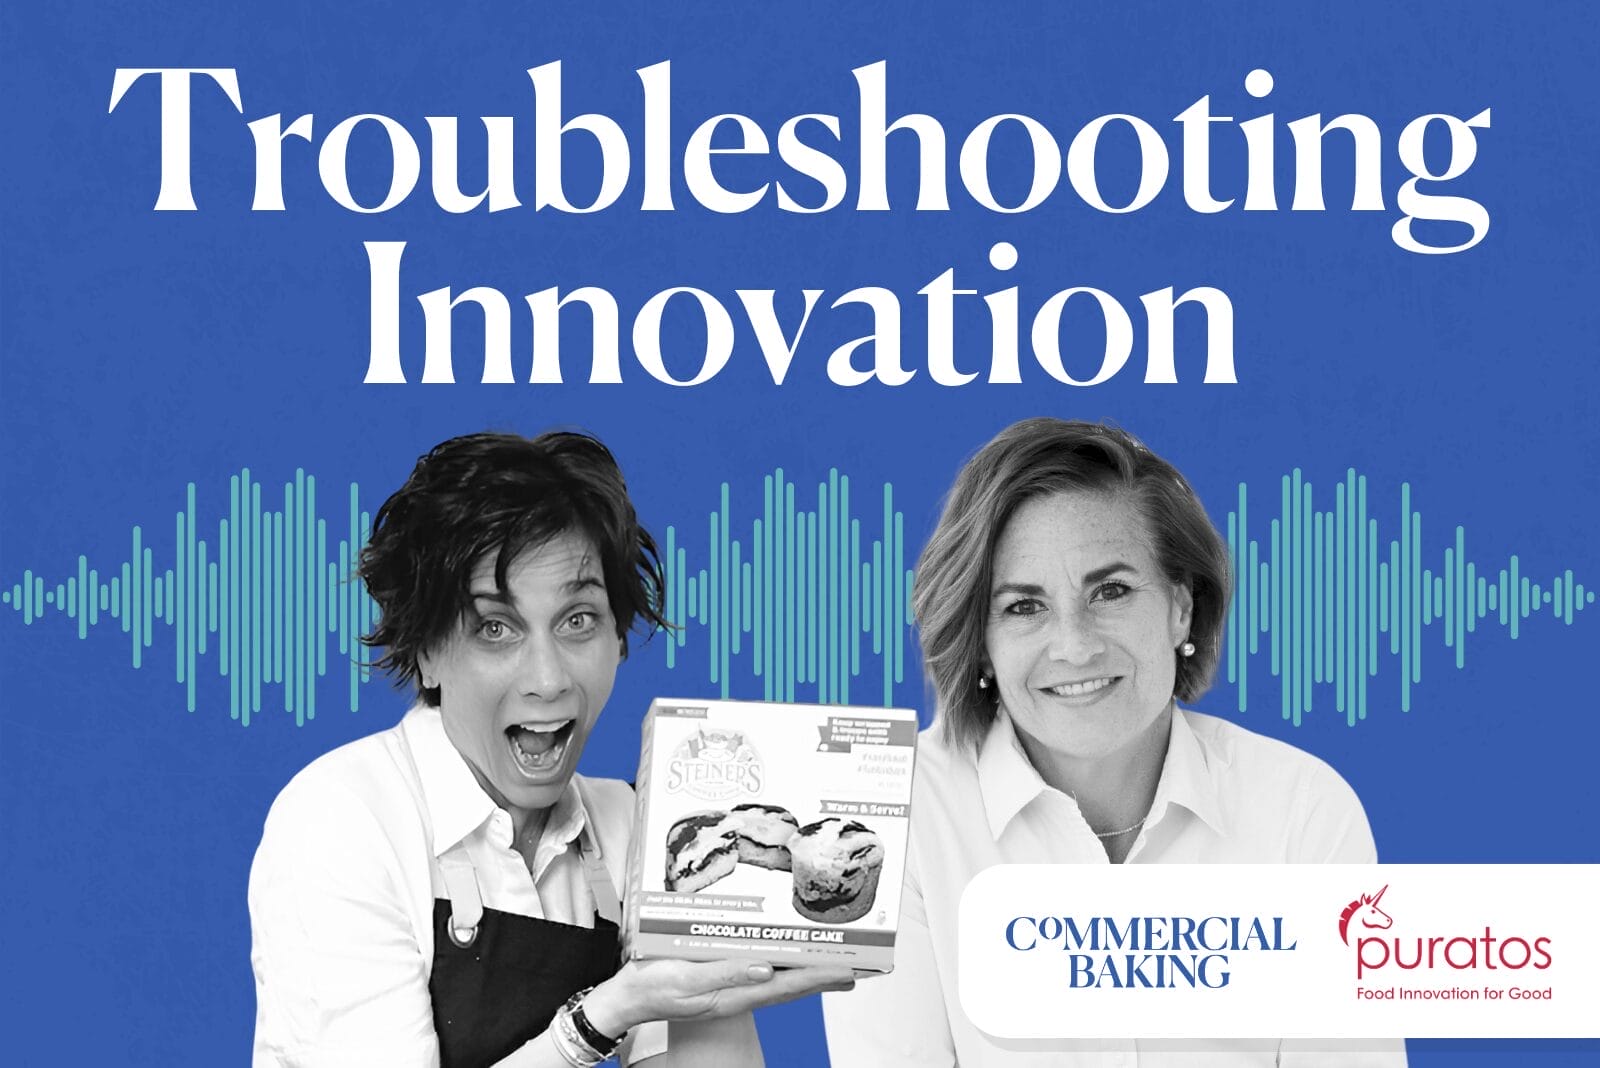 Troubleshooting Innovation podcast logo with images of Jennifer Steiner Pool and Joannie Spencer